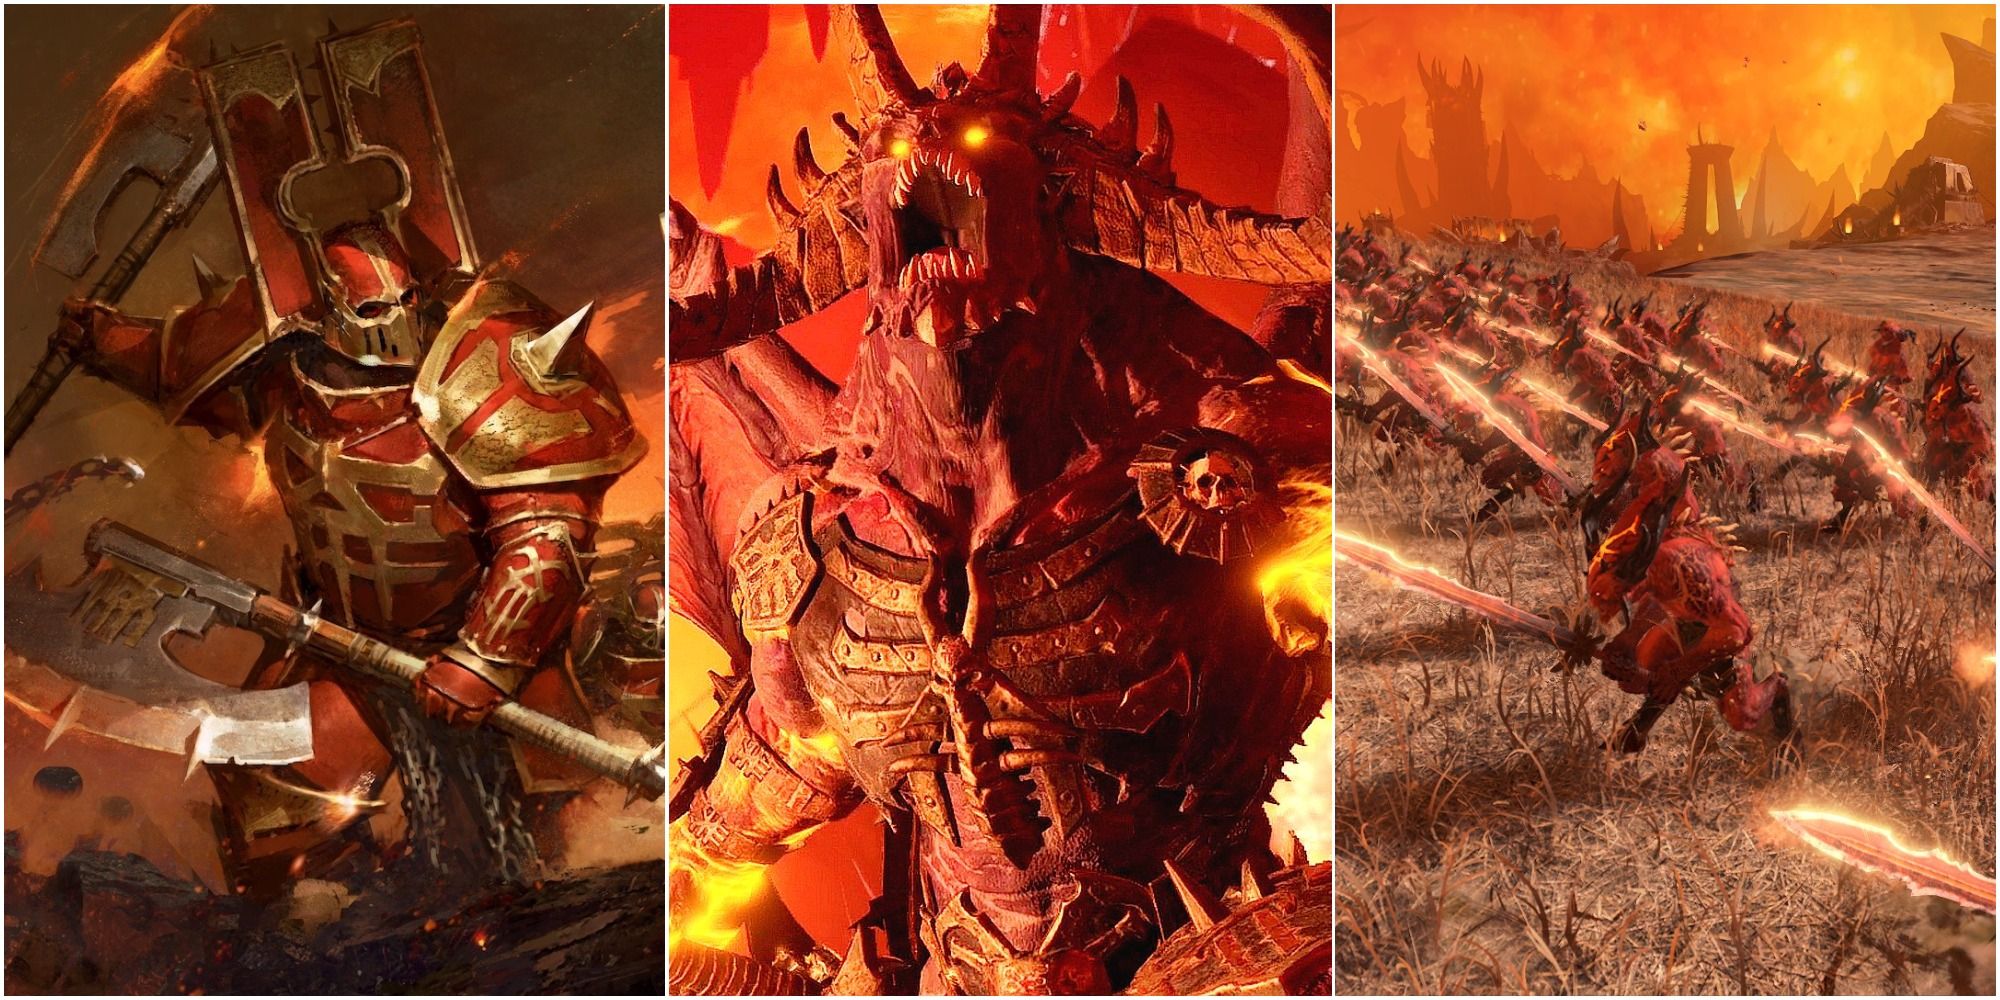 Total War Warhammer 3 Khorne Featured showing Khorne, Chaos Warriors and Bloodletters